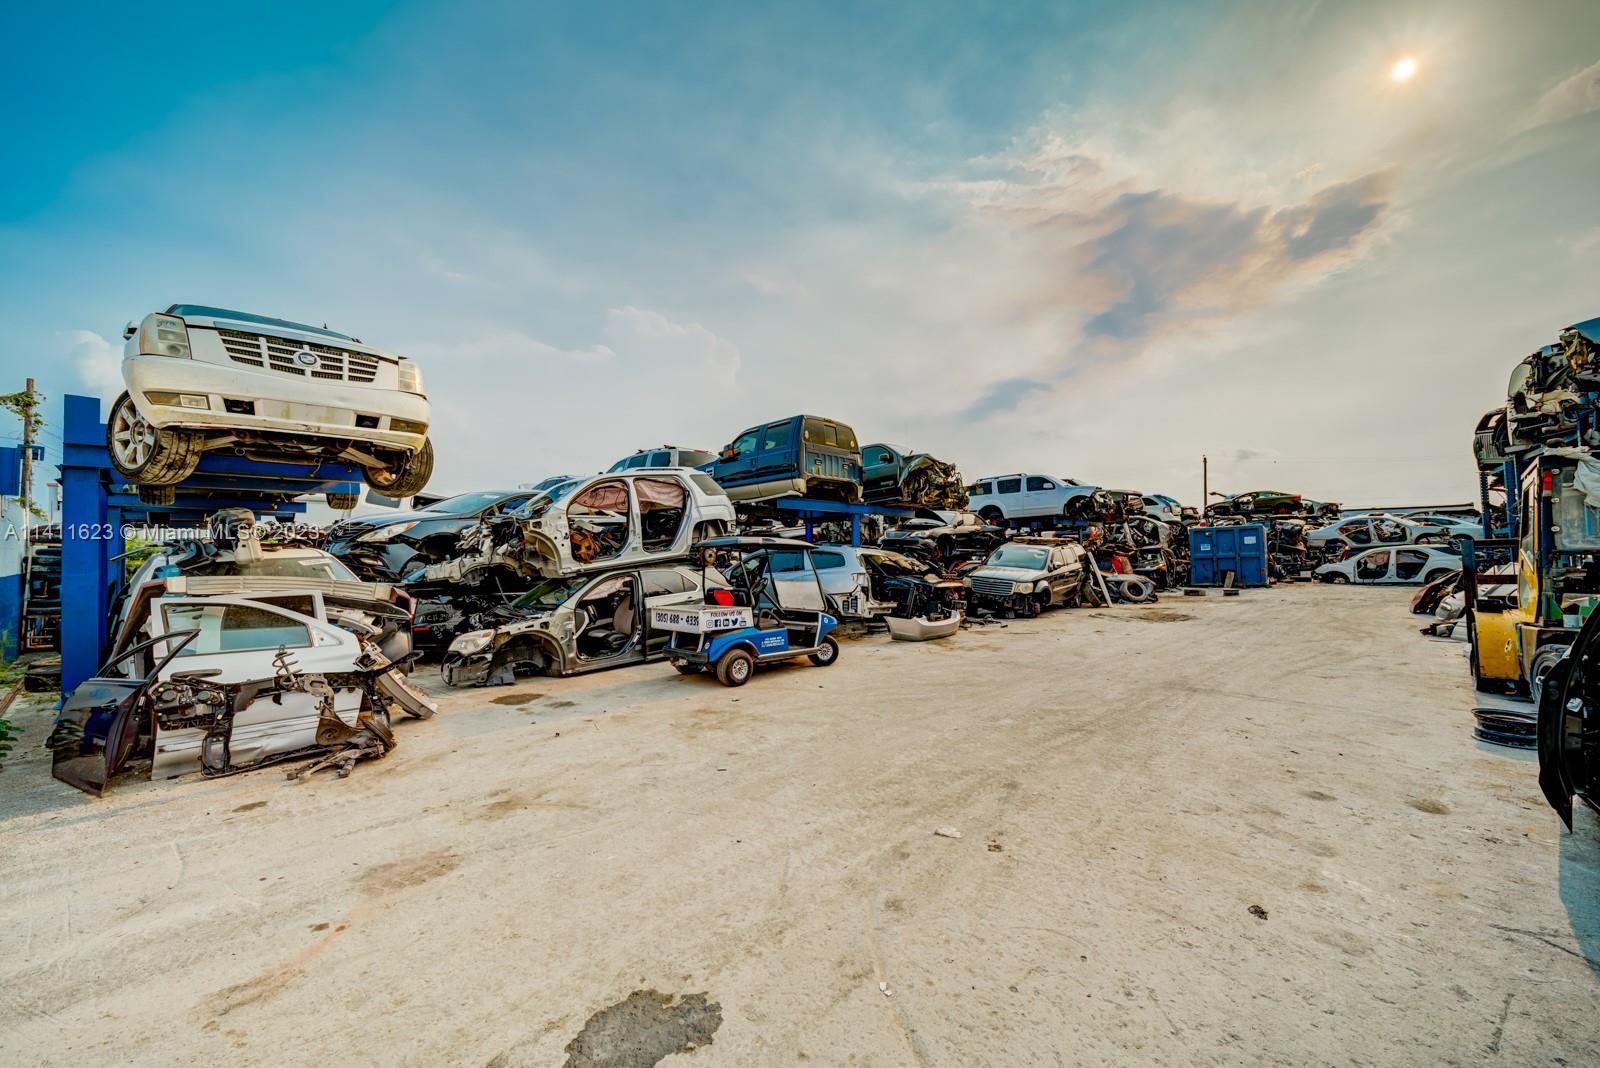 Photo of 2 Junkyards For Sale In S Florida With Real Est Included in Unincorporated Dade County, FL